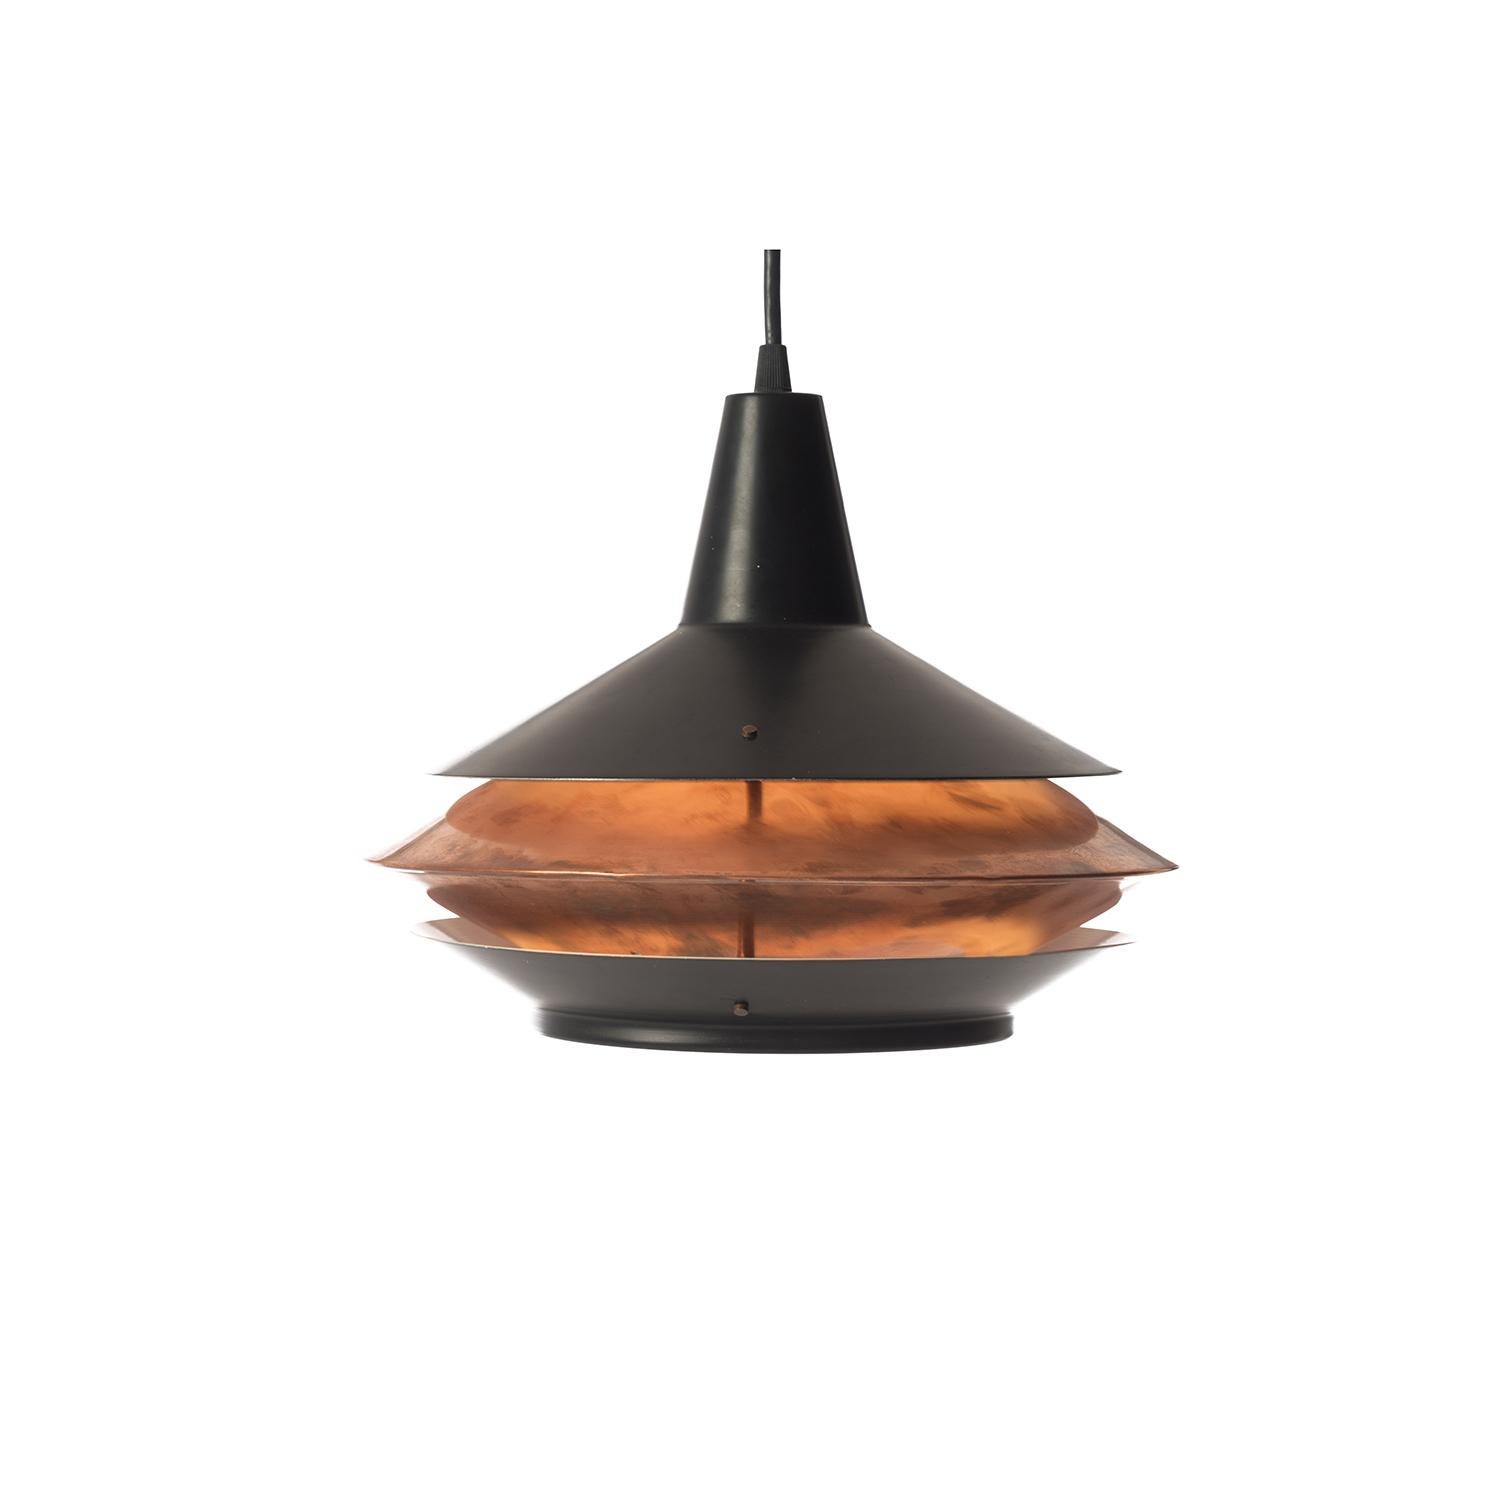 This vintage original pendant fixture is shaped like a lantern, the patinated copper plated interior emits a warm glow from within. The fixture has been updated with North American socket and wiring. It can be plugged in or hard-wired. 100 watt